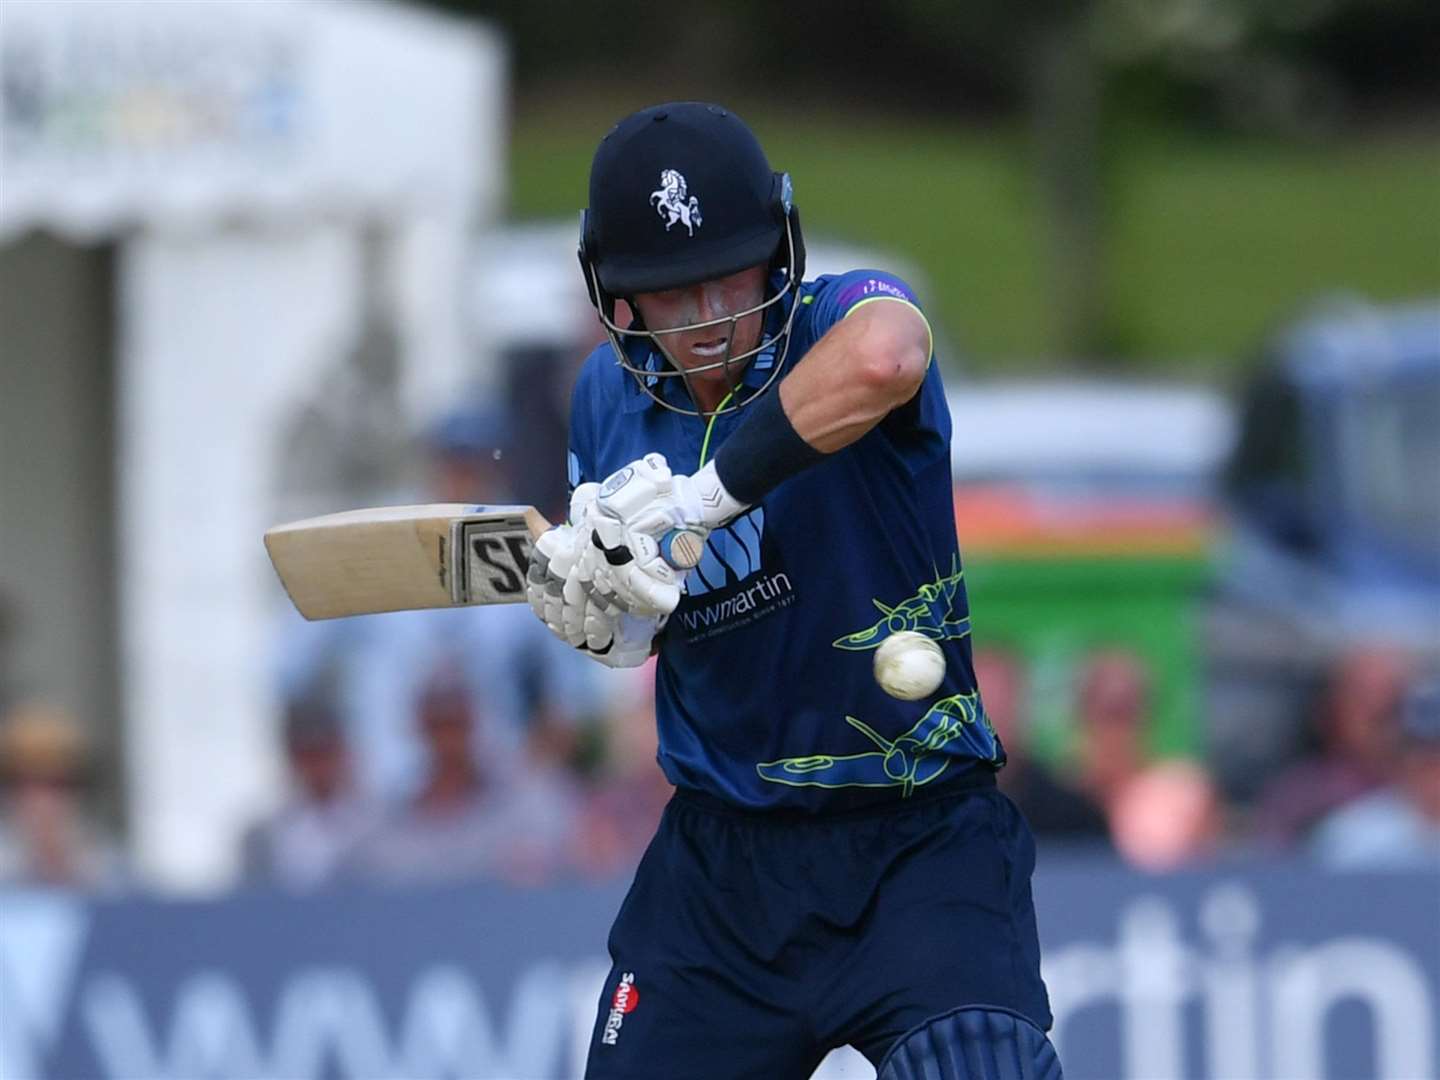 Kent's Joe Denly on his way to a century against Gloucestershire on Sunday. Picture: Keith Gillard